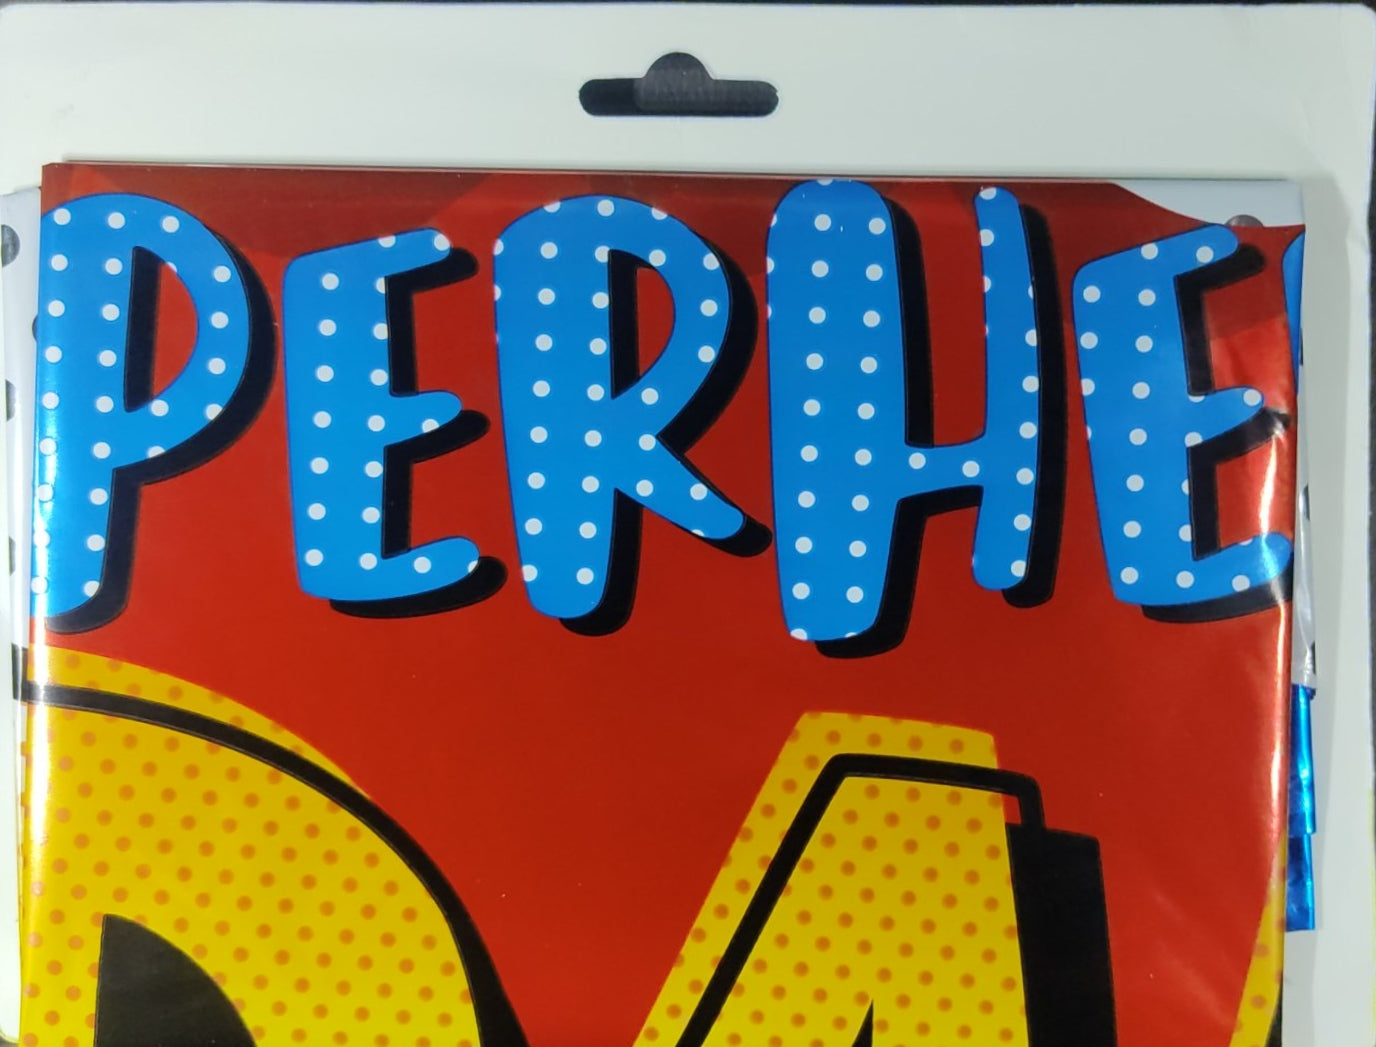 Super Hero Dad Foil Balloon - 5 pieces set for Simple Birthday Decorations at Home